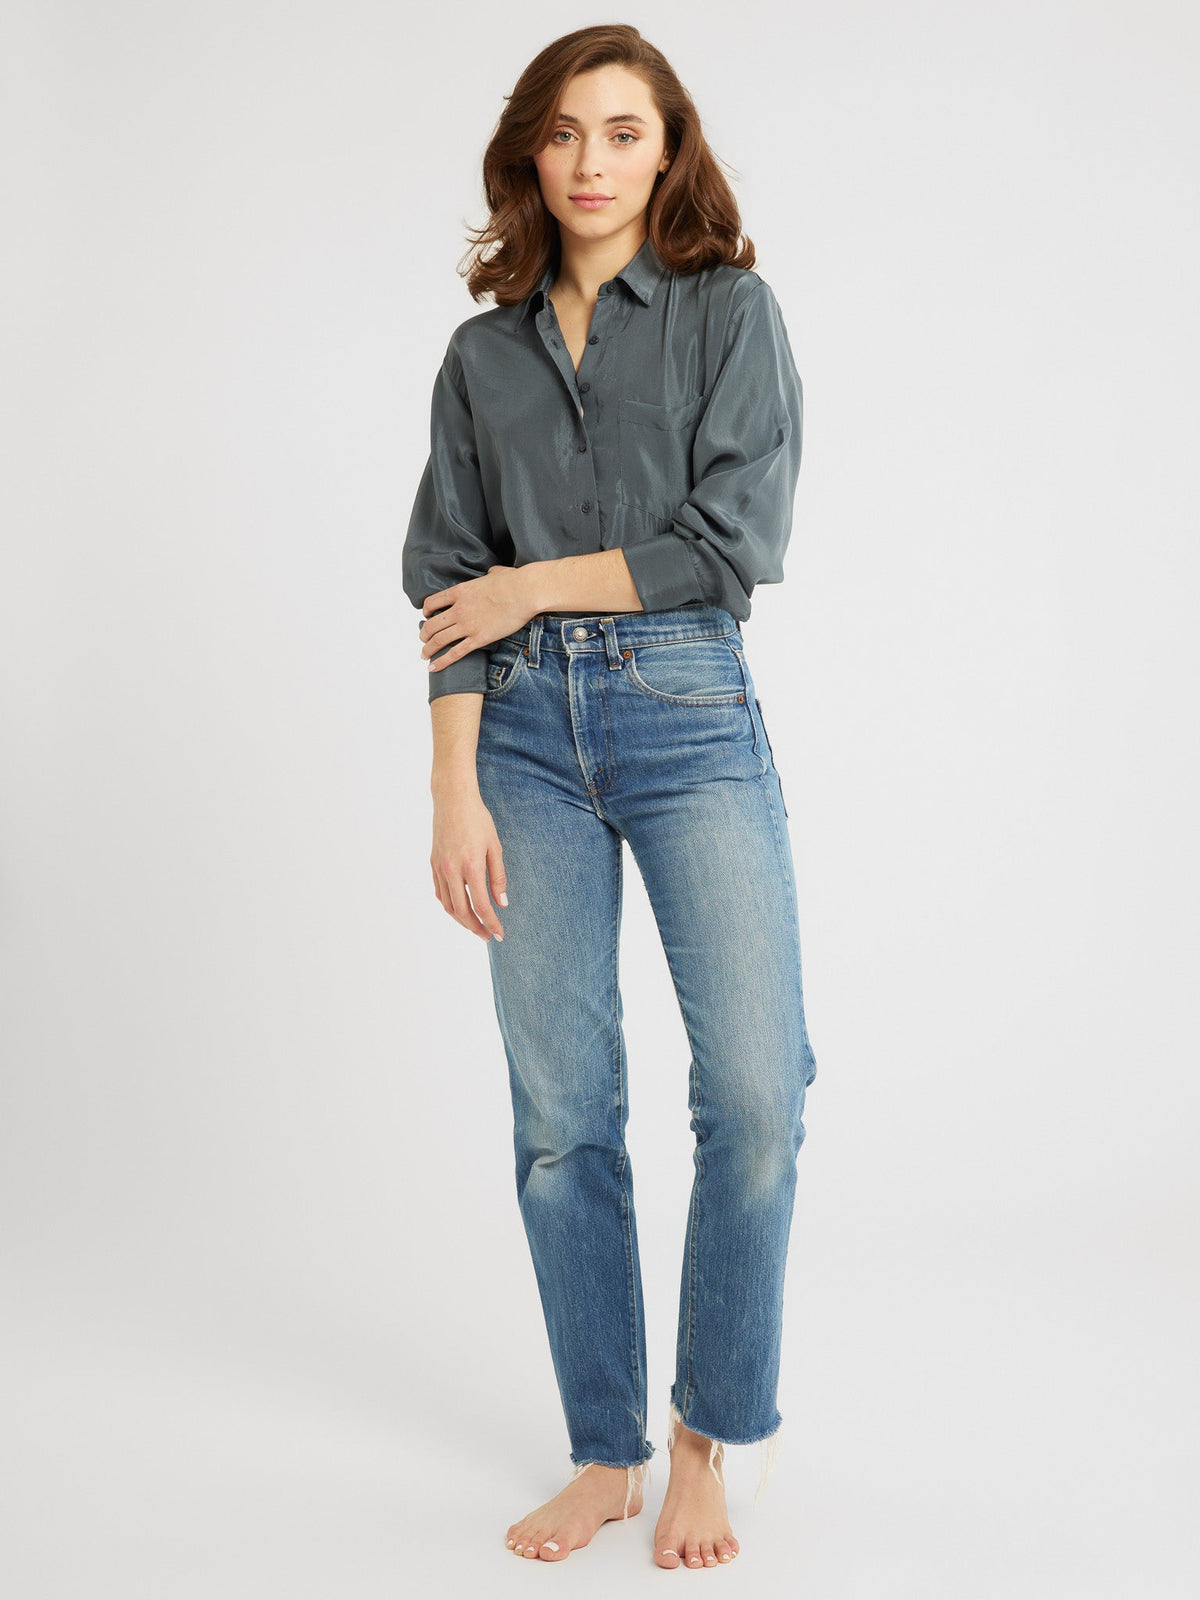 Sofia Top in Navy Washed Silk – MILLE